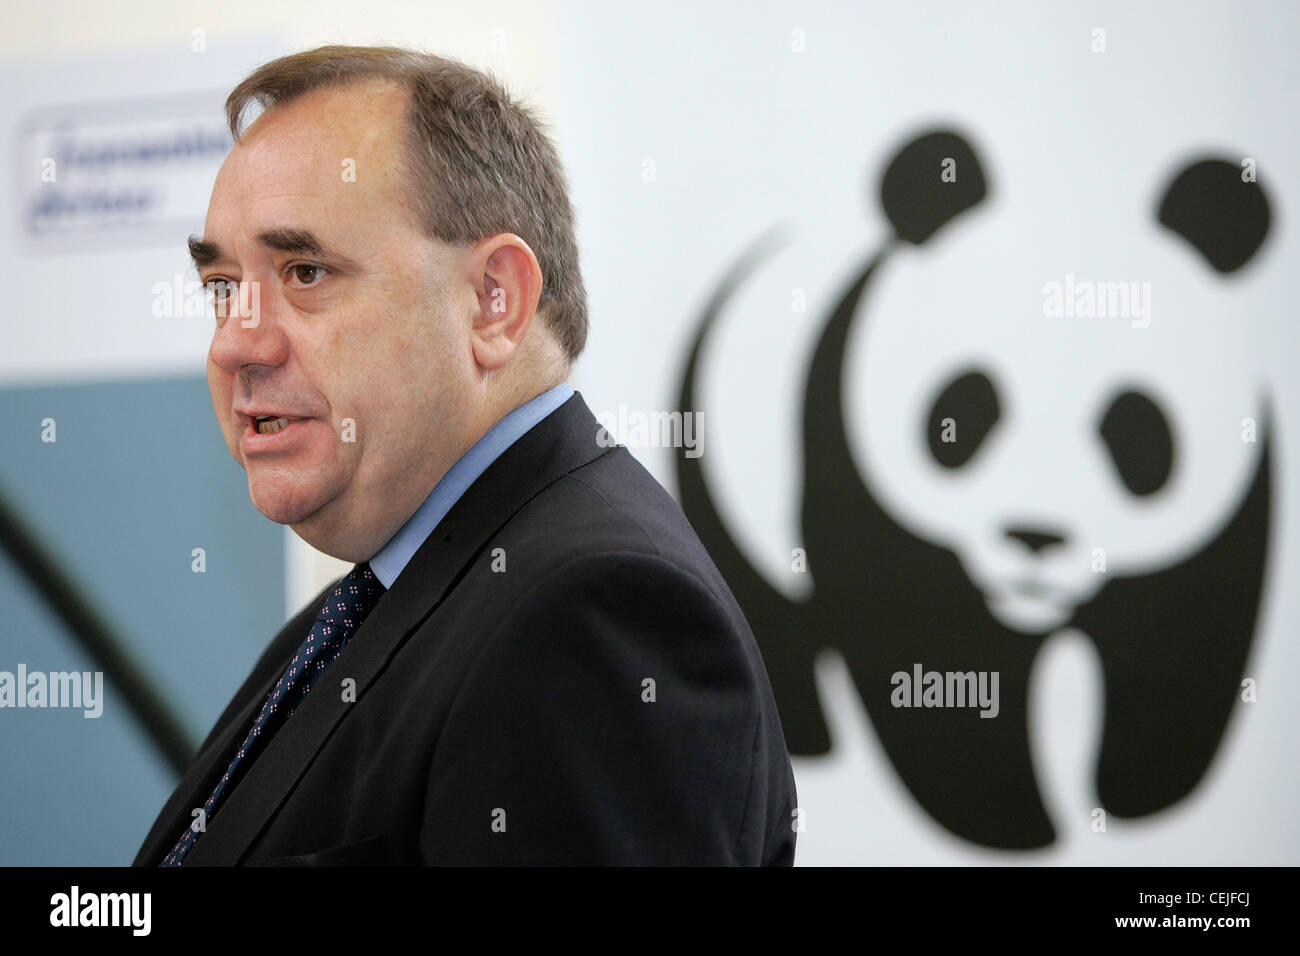 Scotland's First Minister Alex Salmond speaking about renewable energy in front of the WWF Panda logo. Stock Photo